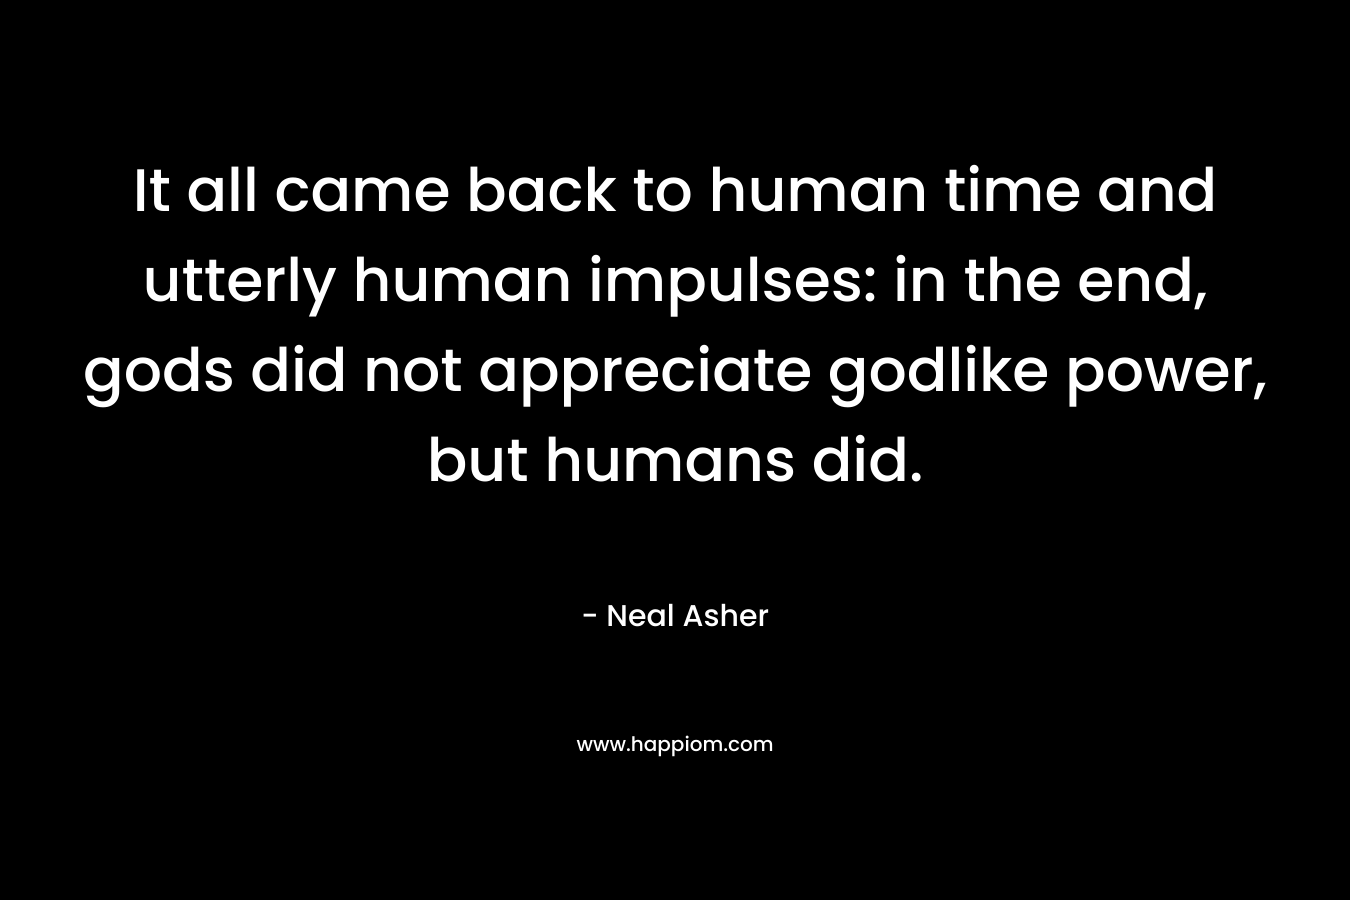 It all came back to human time and utterly human impulses: in the end, gods did not appreciate godlike power, but humans did. – Neal Asher